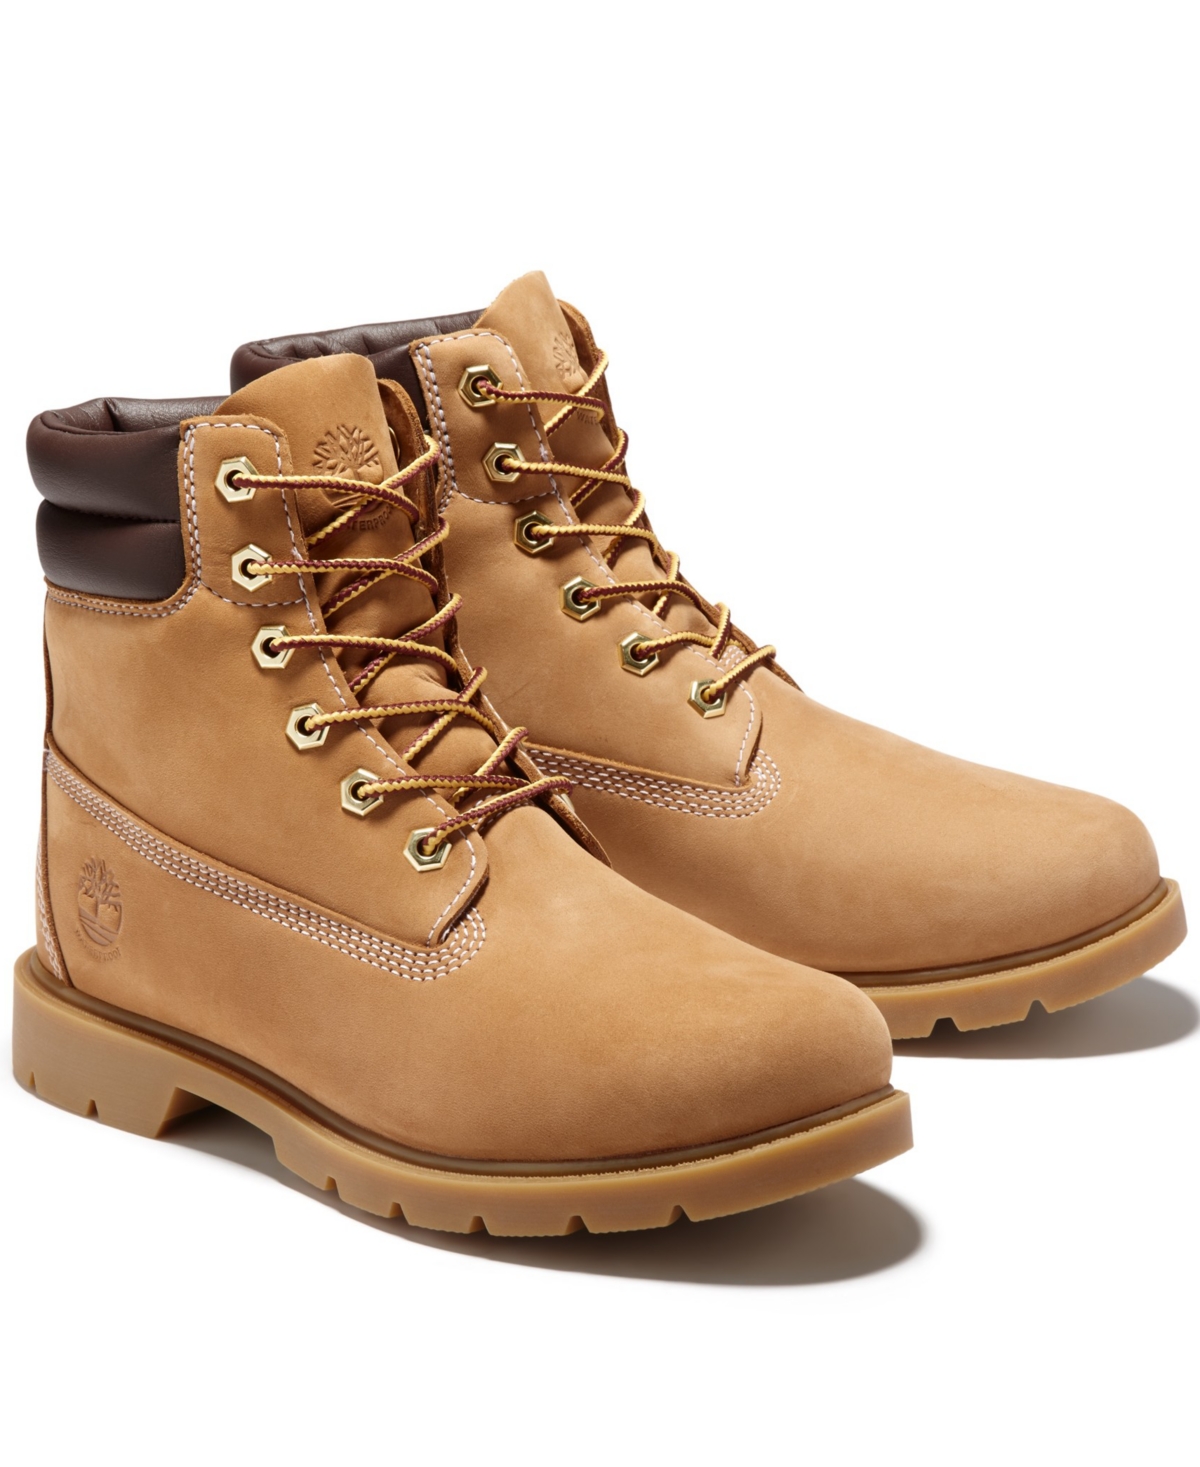 Timberland Women's Linden Wood Waterproof Lug Sole Booties From Finish Line In Wheat Nubuck